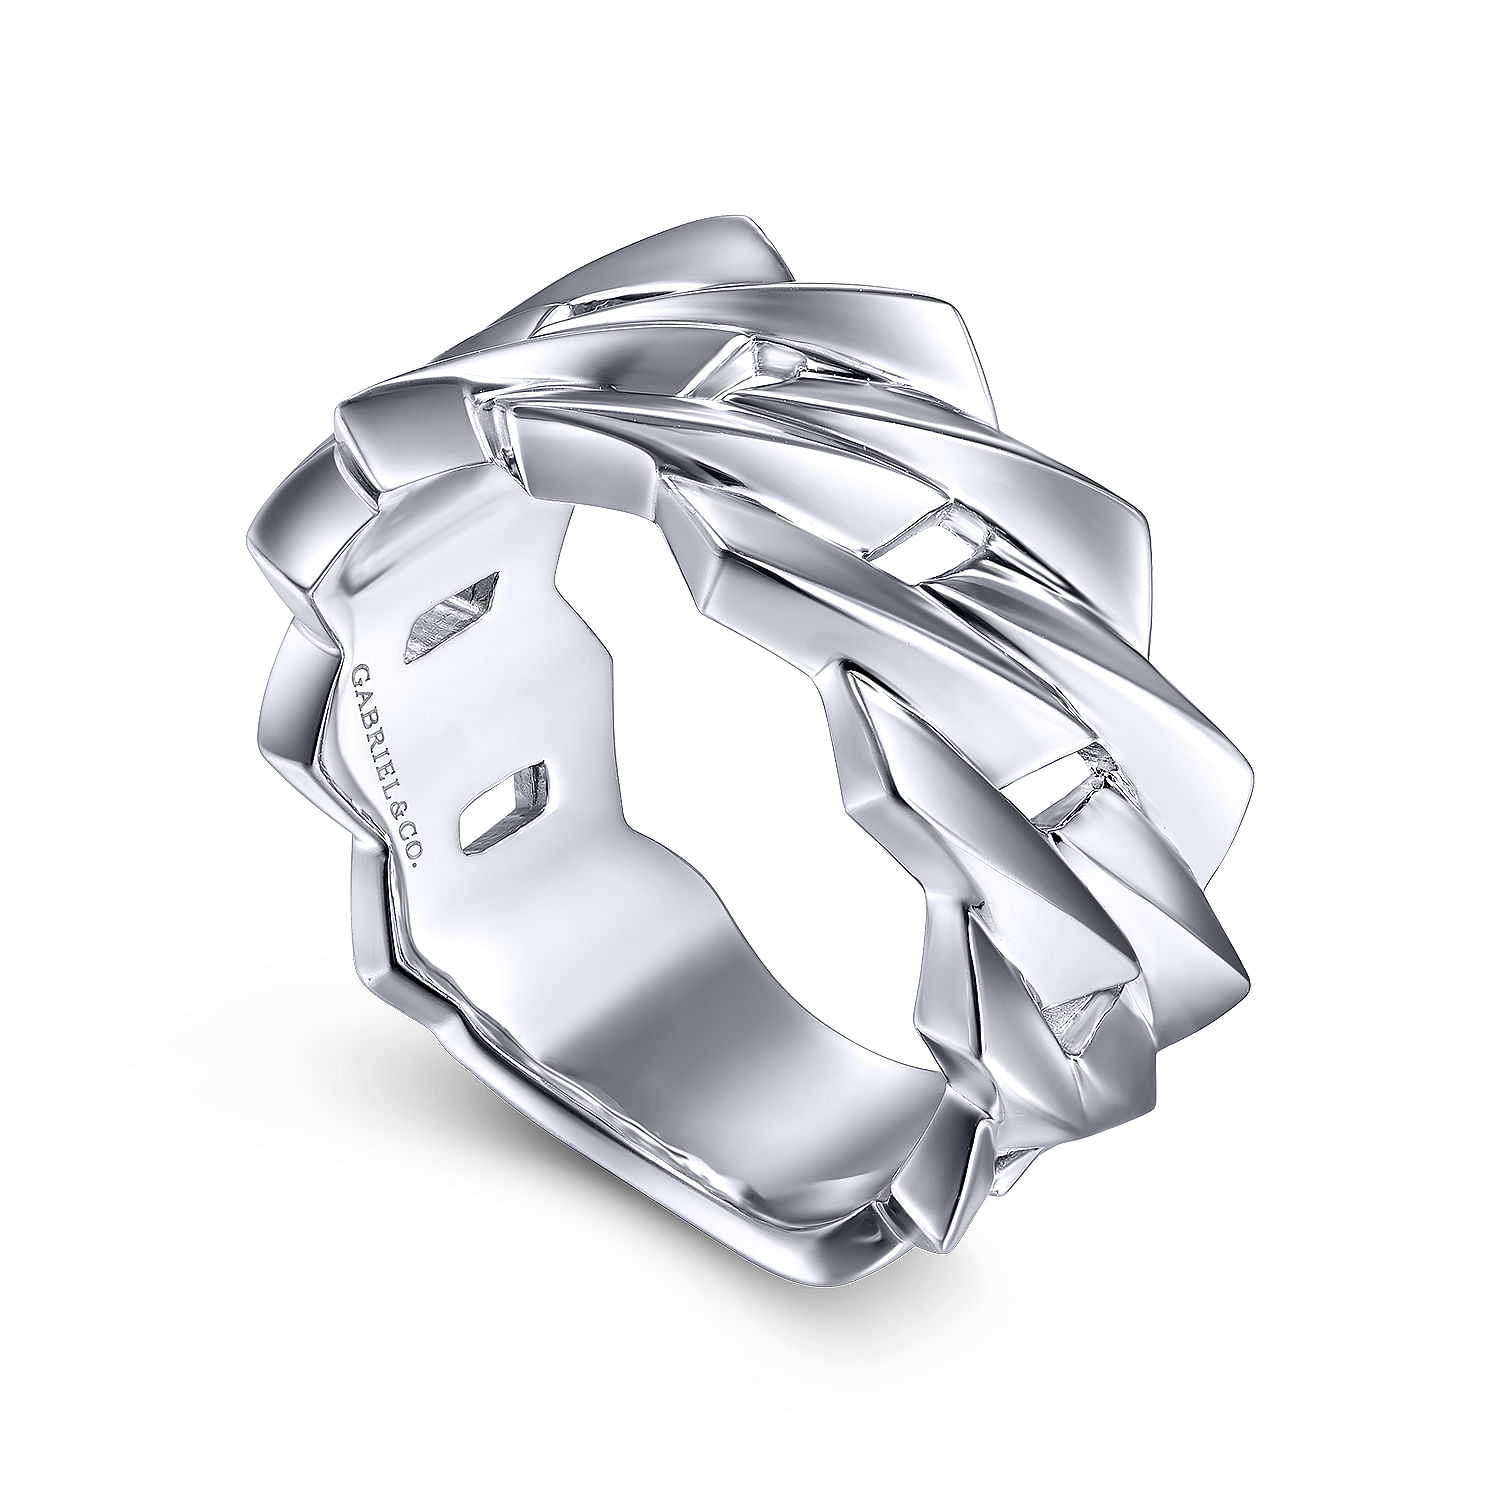 Wide 925 Sterling Silver Chain Link Band in High Polished Finish